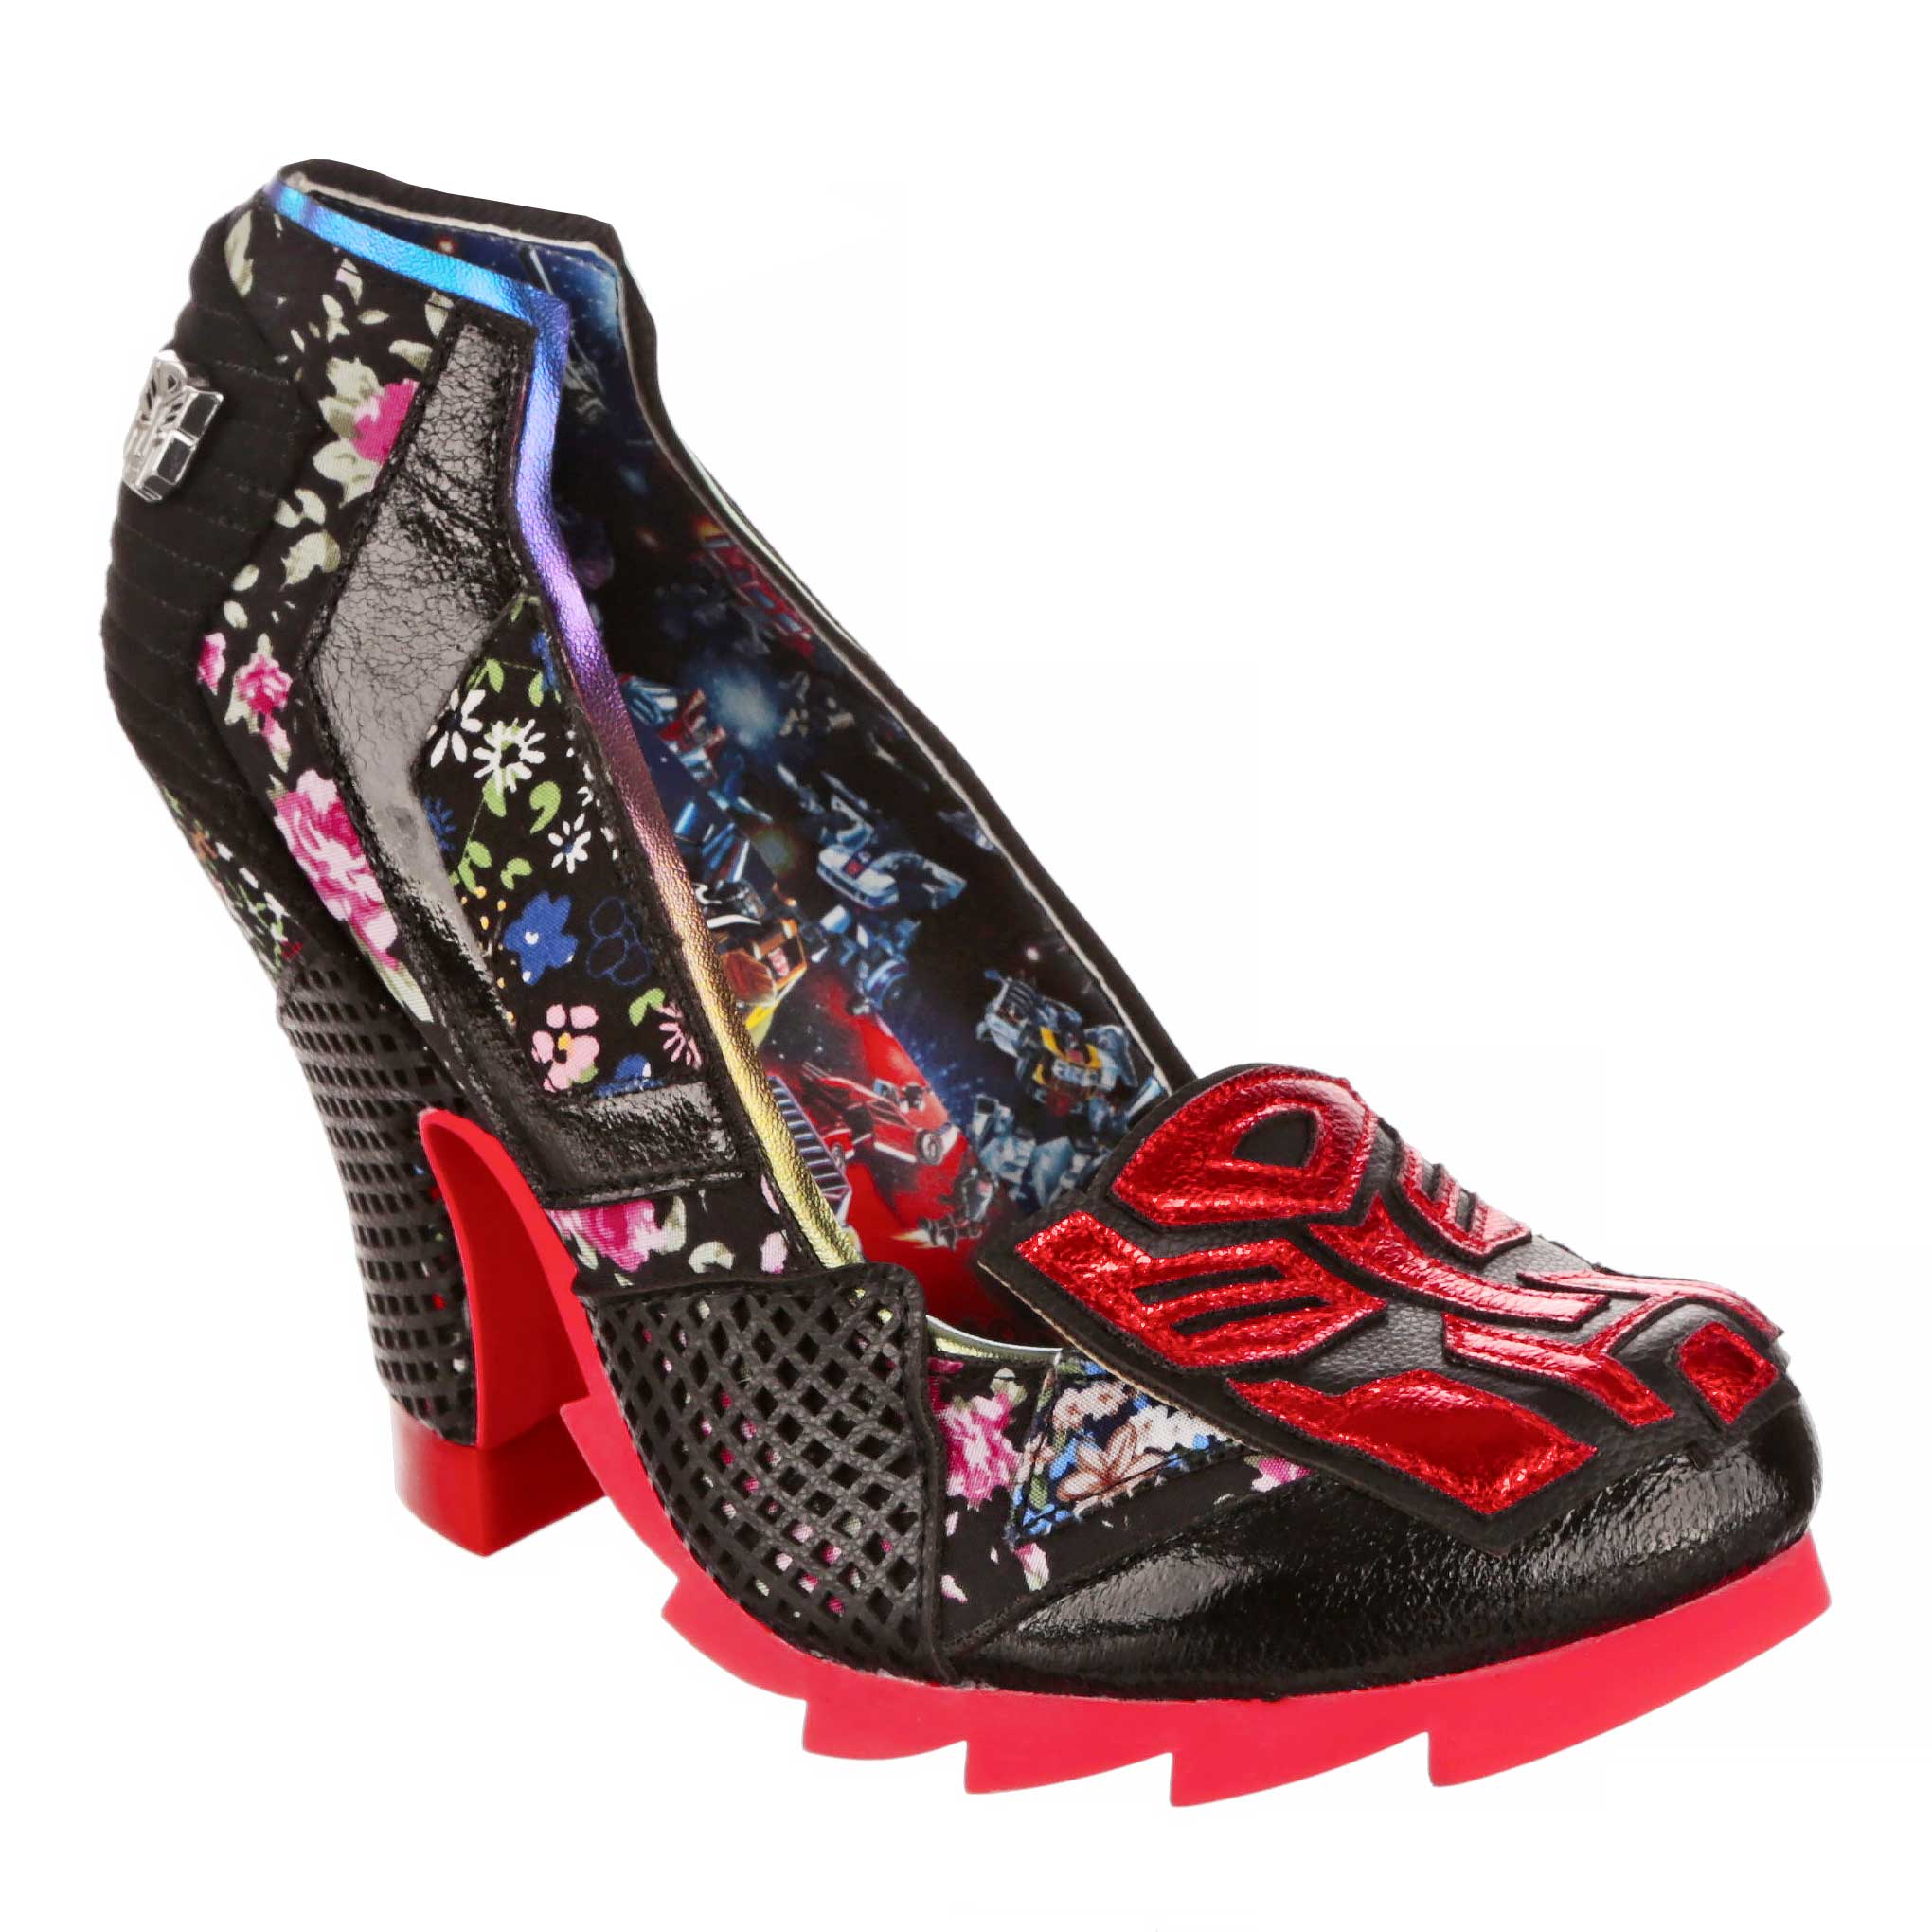 Star of the Show Heels from the Hello Kitty and Friends x Irregular Choice